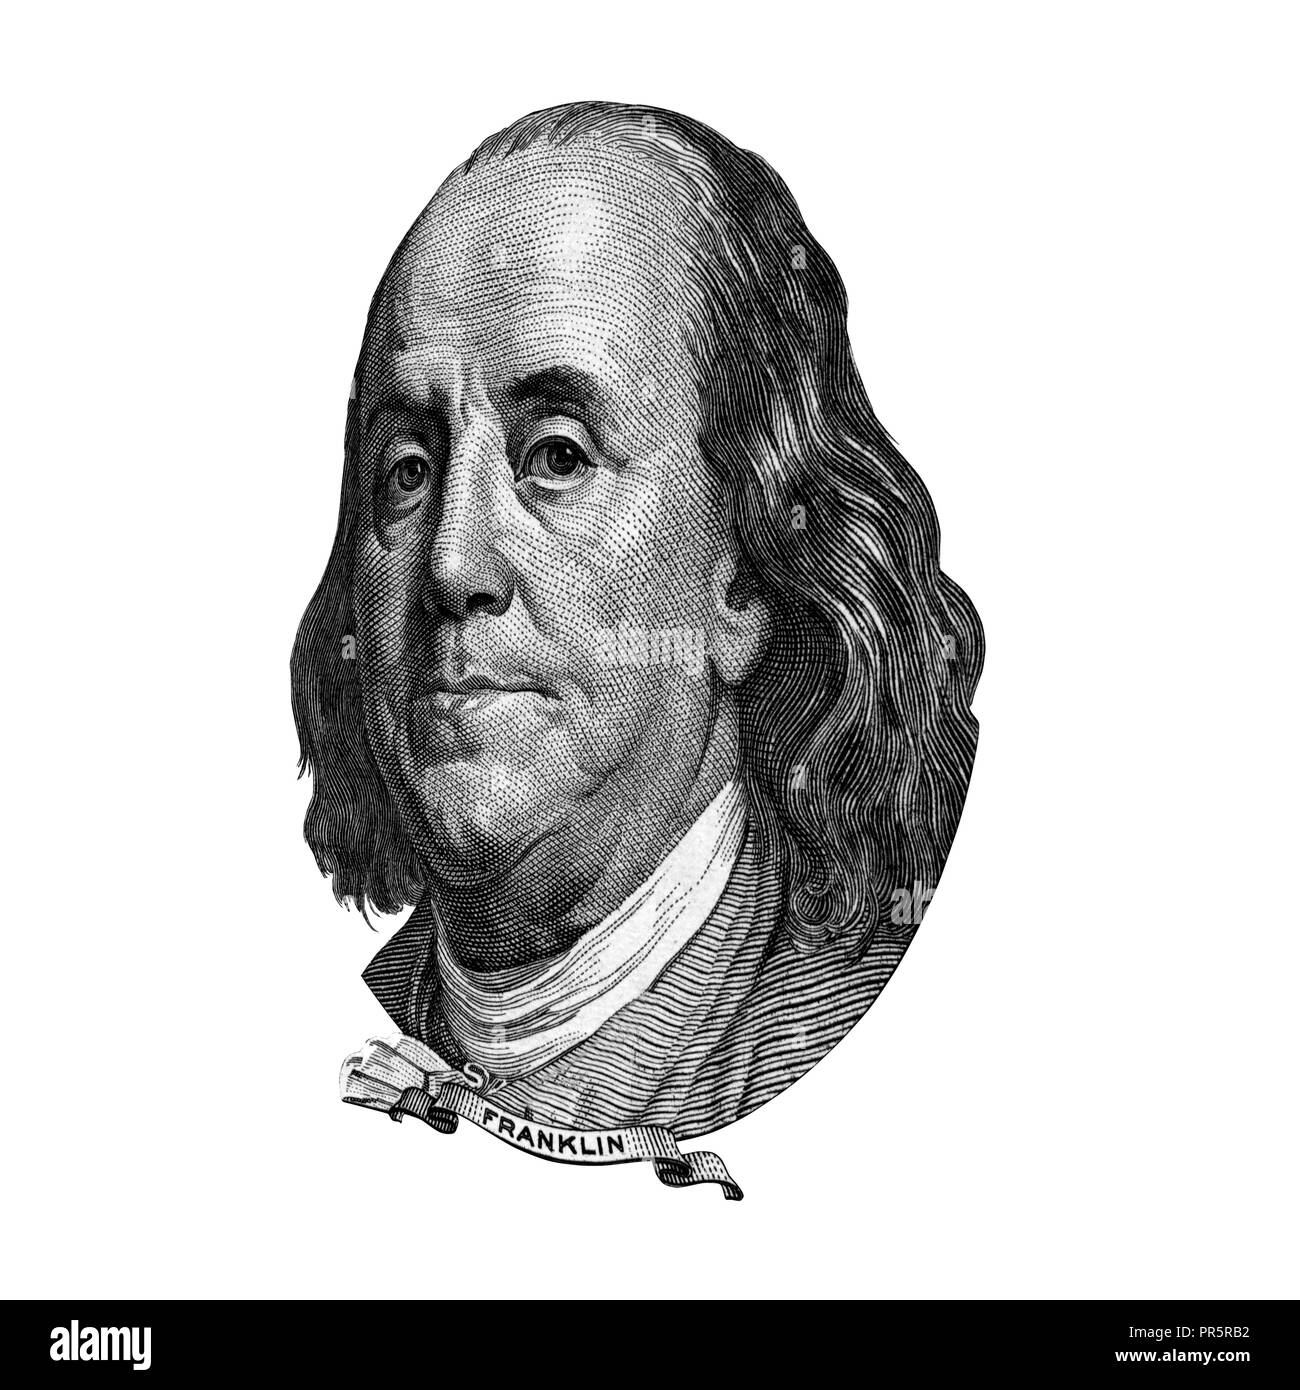 Portrait of U.S. statesman, inventor, and diplomat Benjamin Franklin as he looks on one hundred dollar bill obverse. Photo at an angle of 15 degrees. Stock Photo